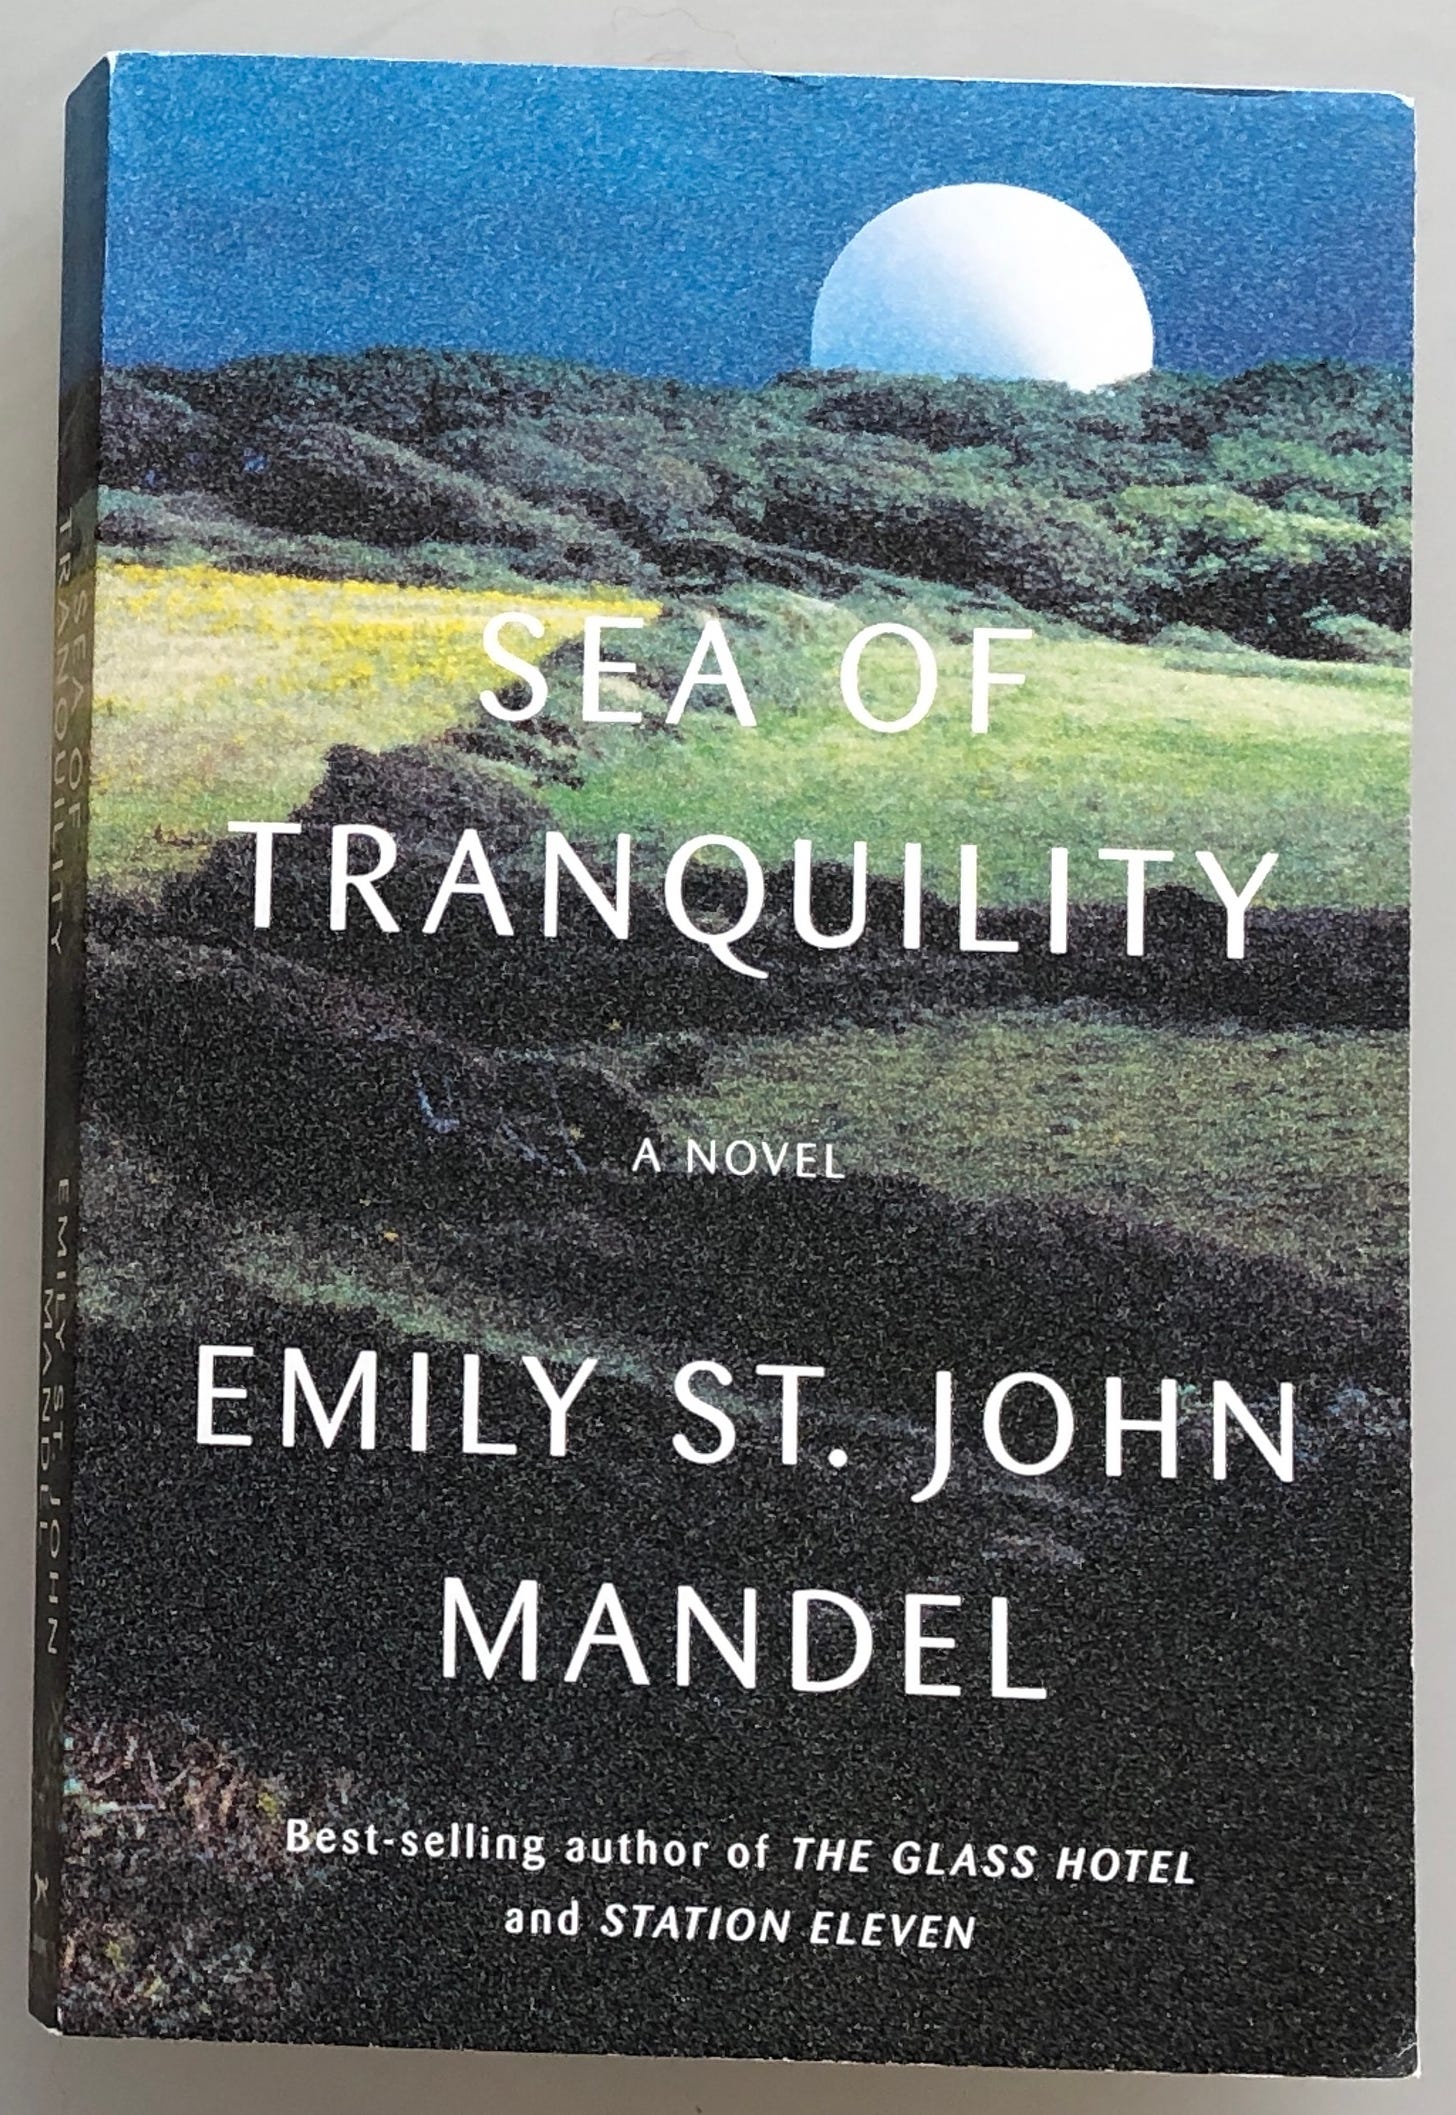 A green and yellow hillside and blue sky with moon rising compose this book cover. Notes that St. John Mandel is the best-selling author of The Glass Hotel and Station 11.